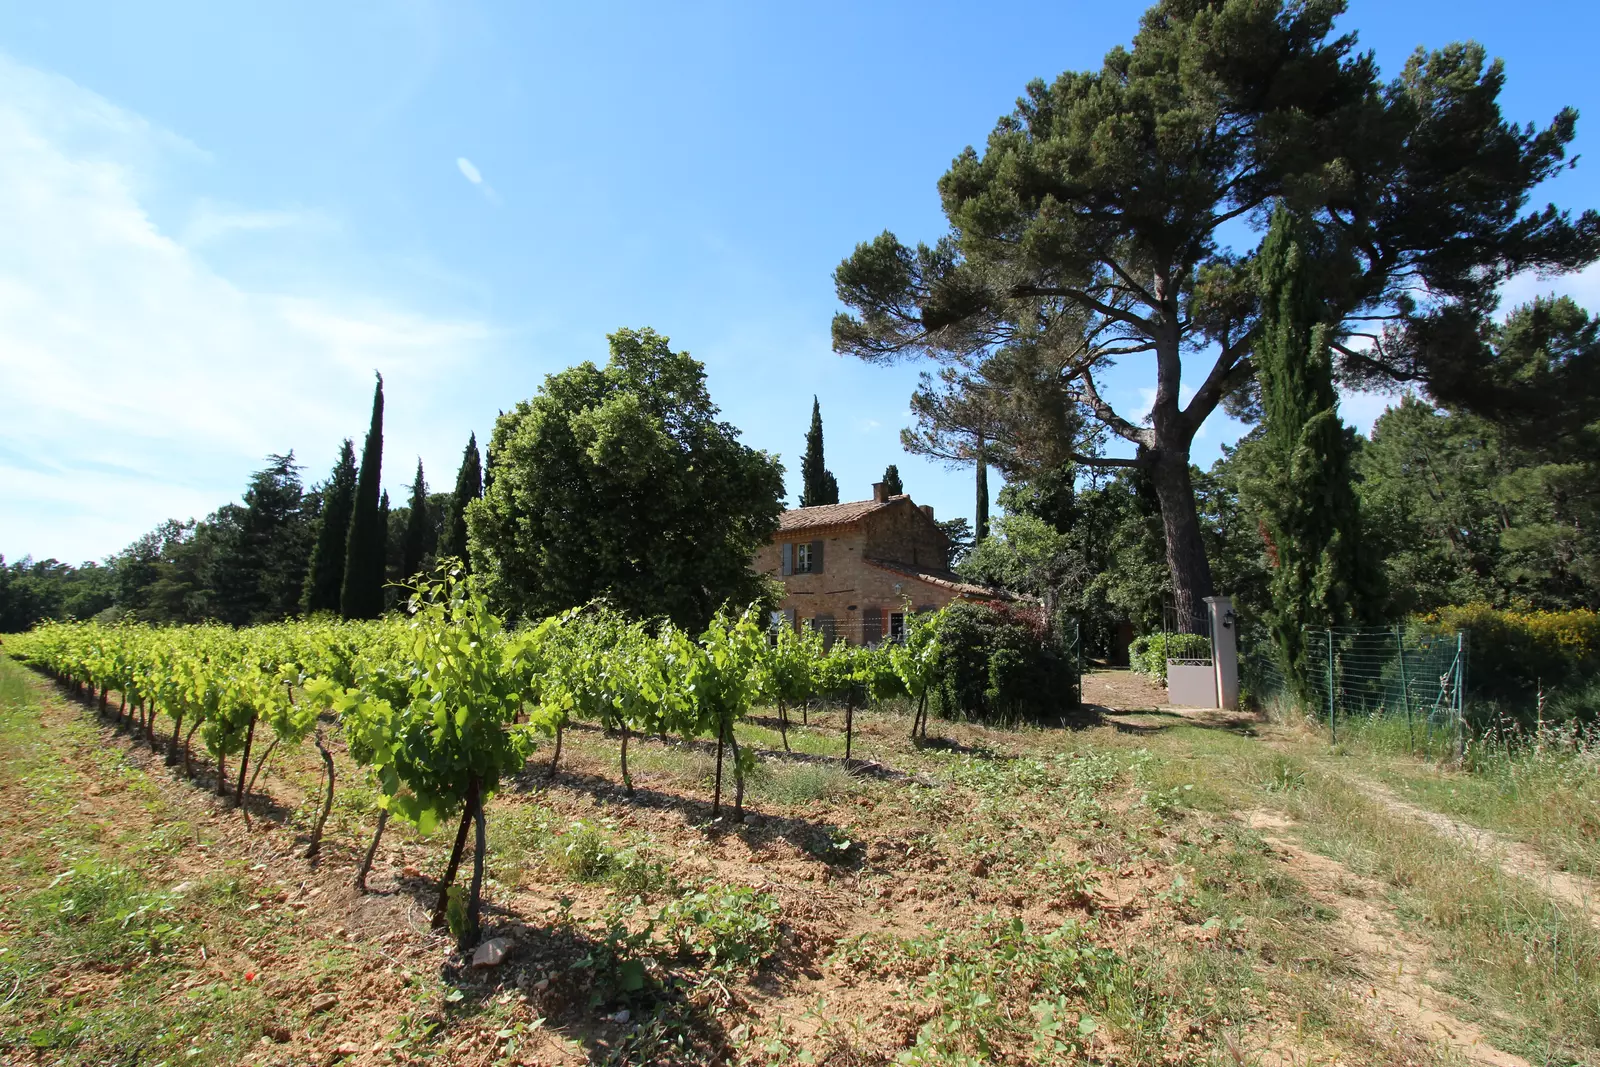 Mas de Charlotte, an authentic stonehouse surrounded by vineyards just at the outskirts of Bedoin, Mont Ventoux